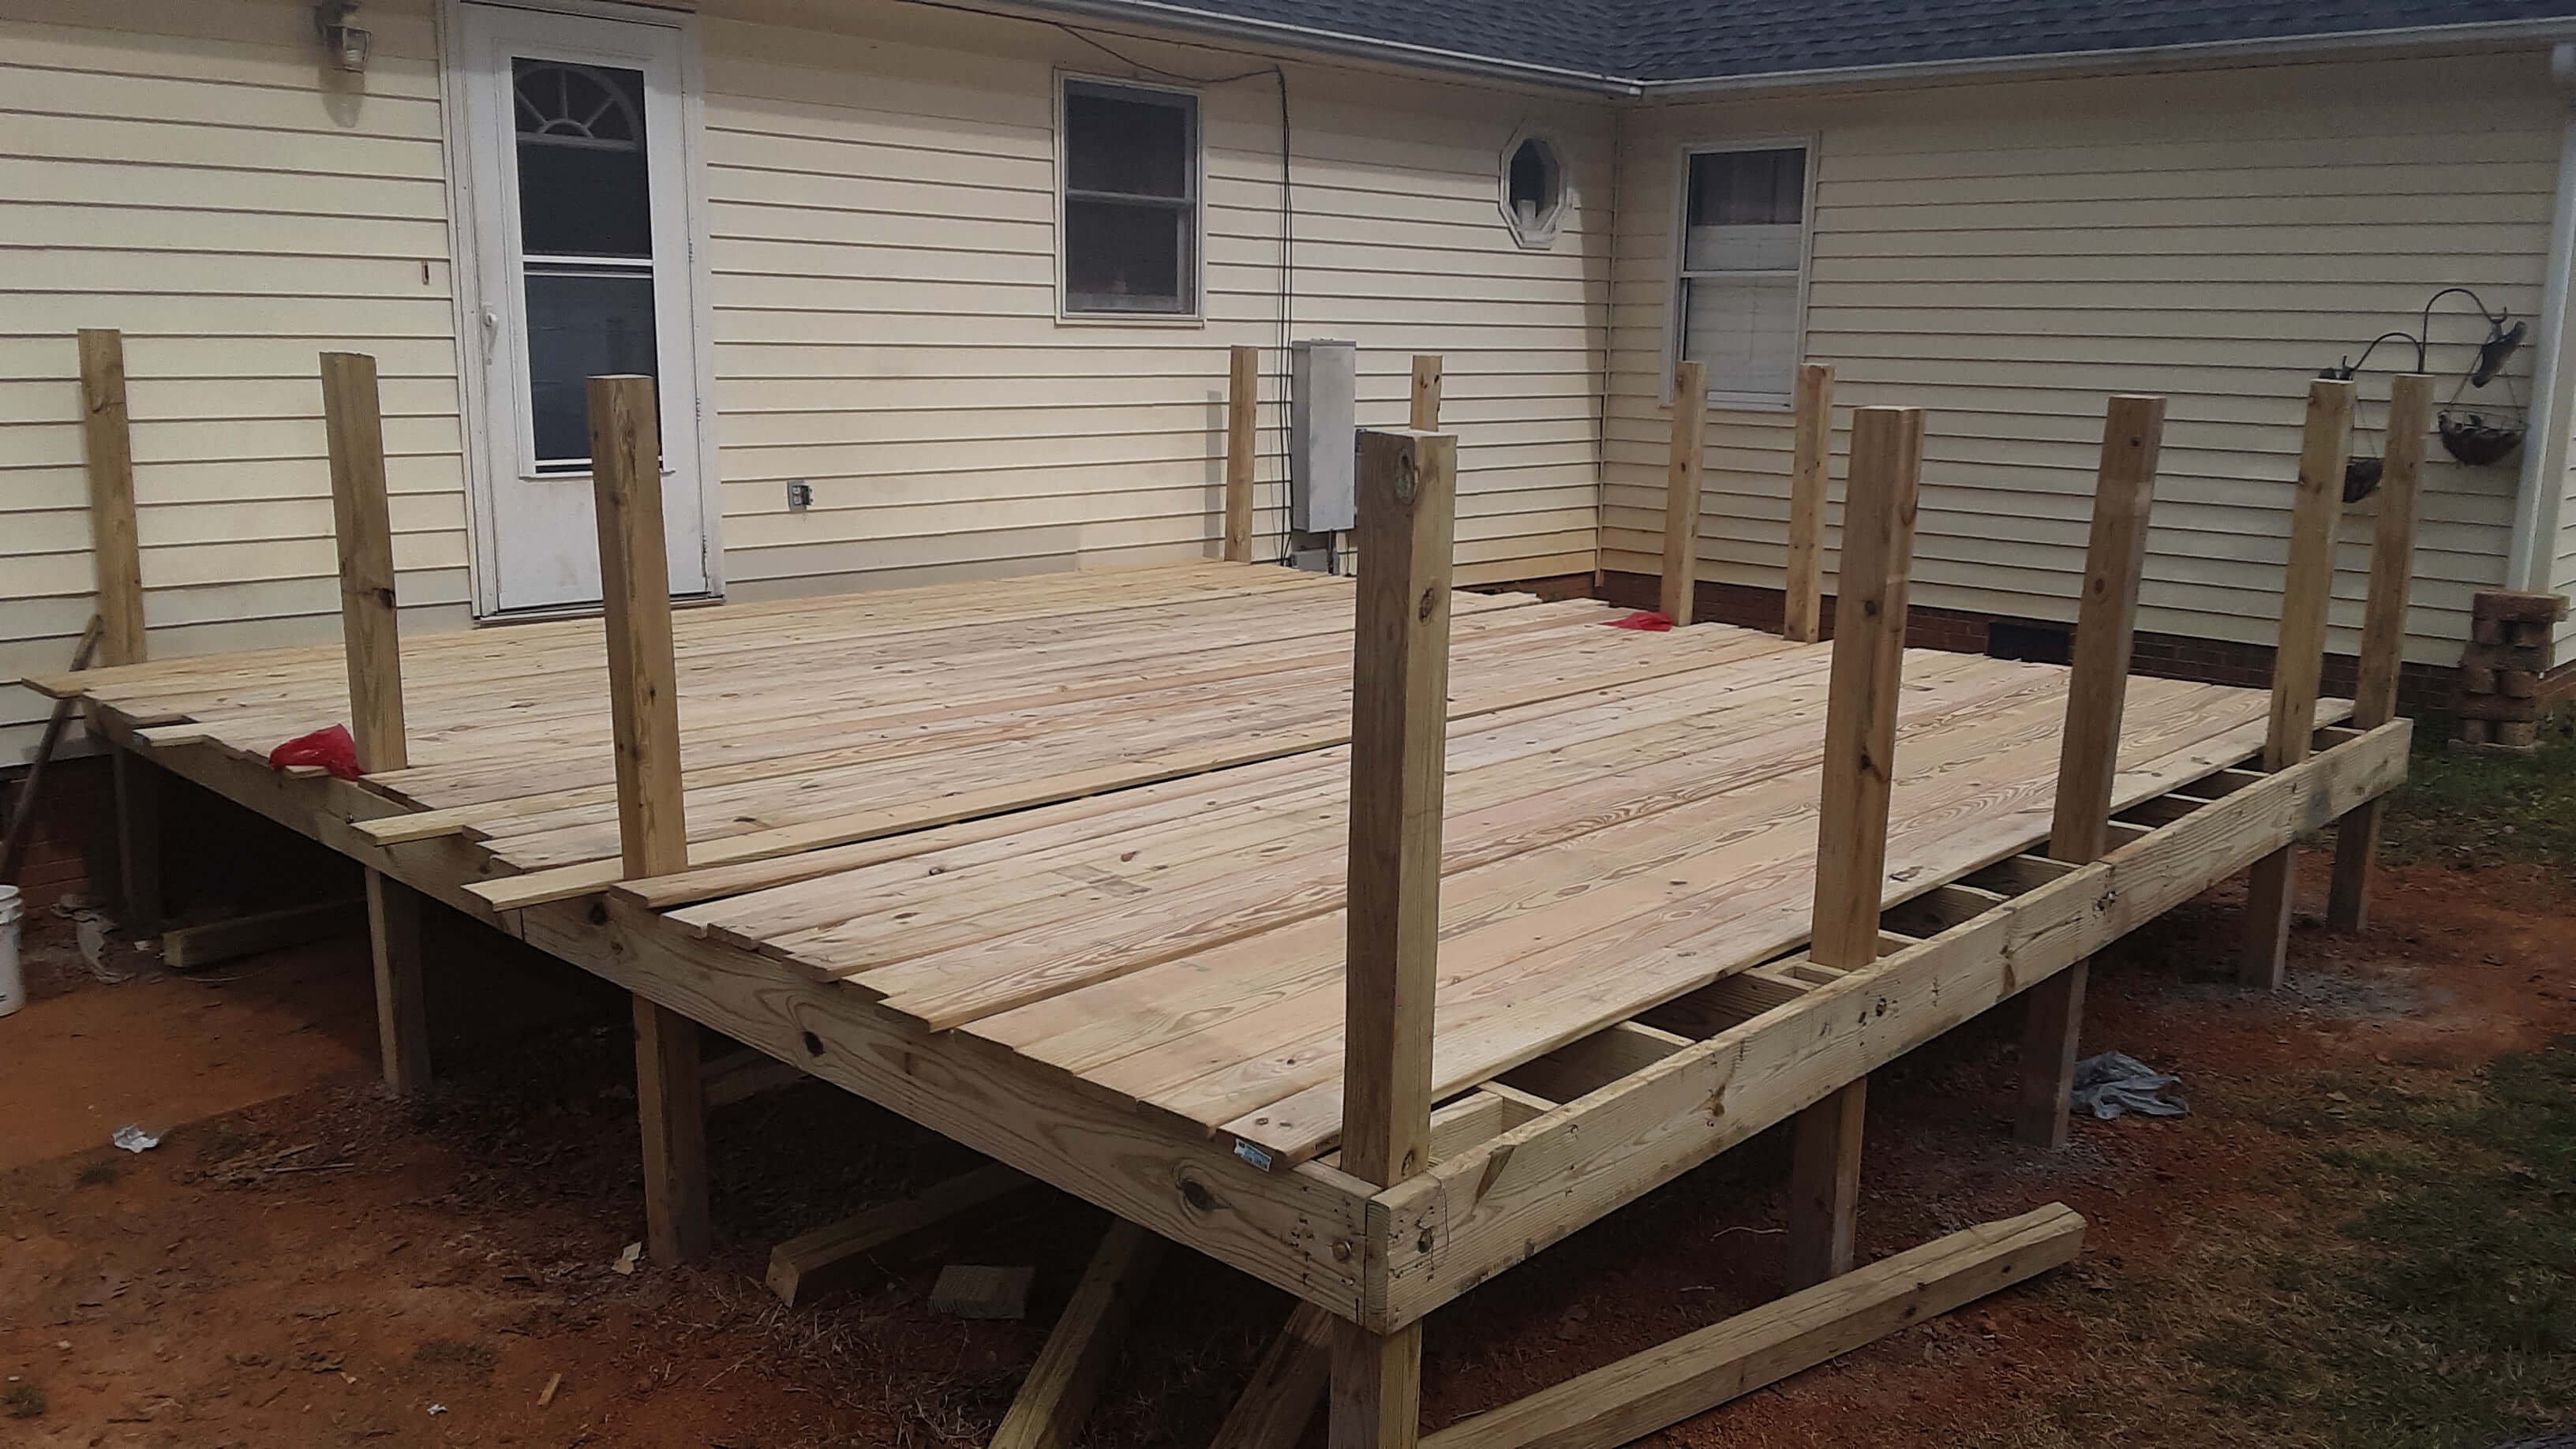 A wooden deck in the early stages of a rebuild.